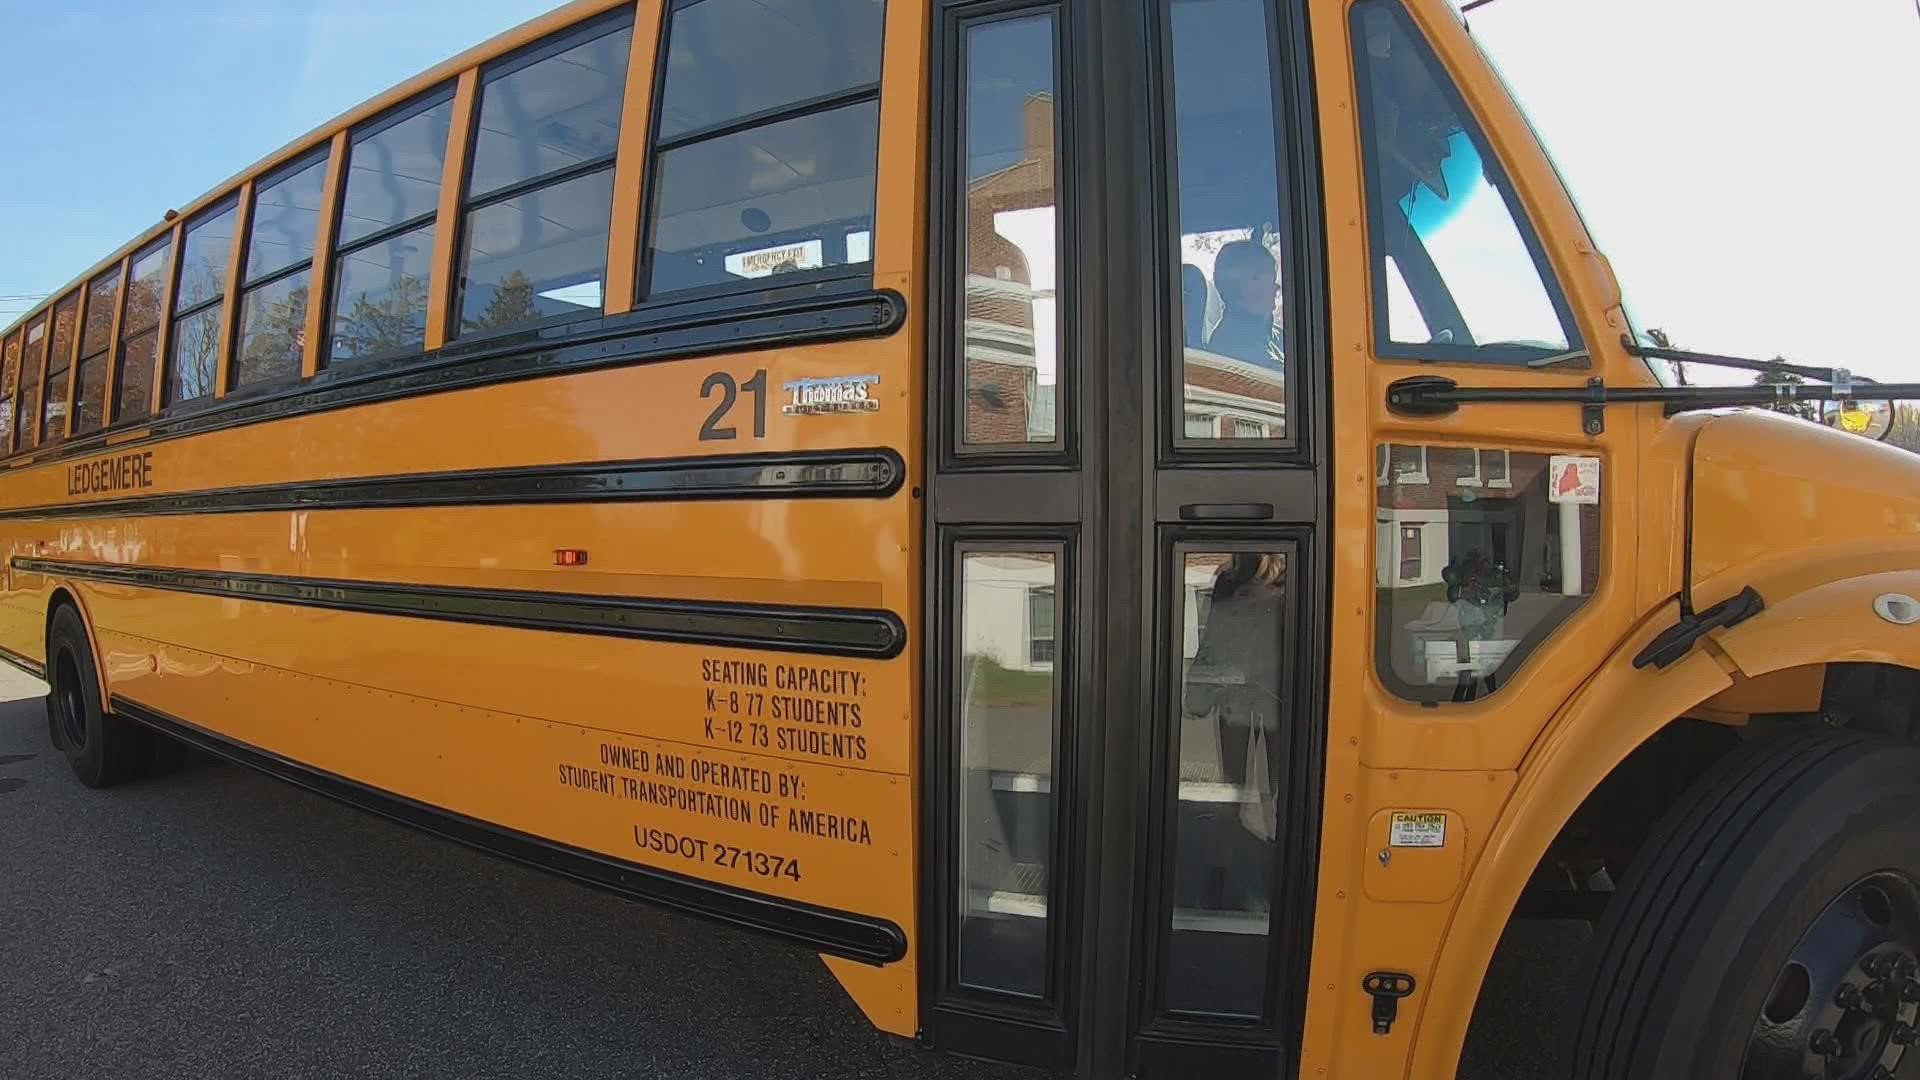 Through the Bipartisan Infrastructure Law, a $13.3M grant will help 13 Maine school districts buy 34 electric-vehicle school buses this year.